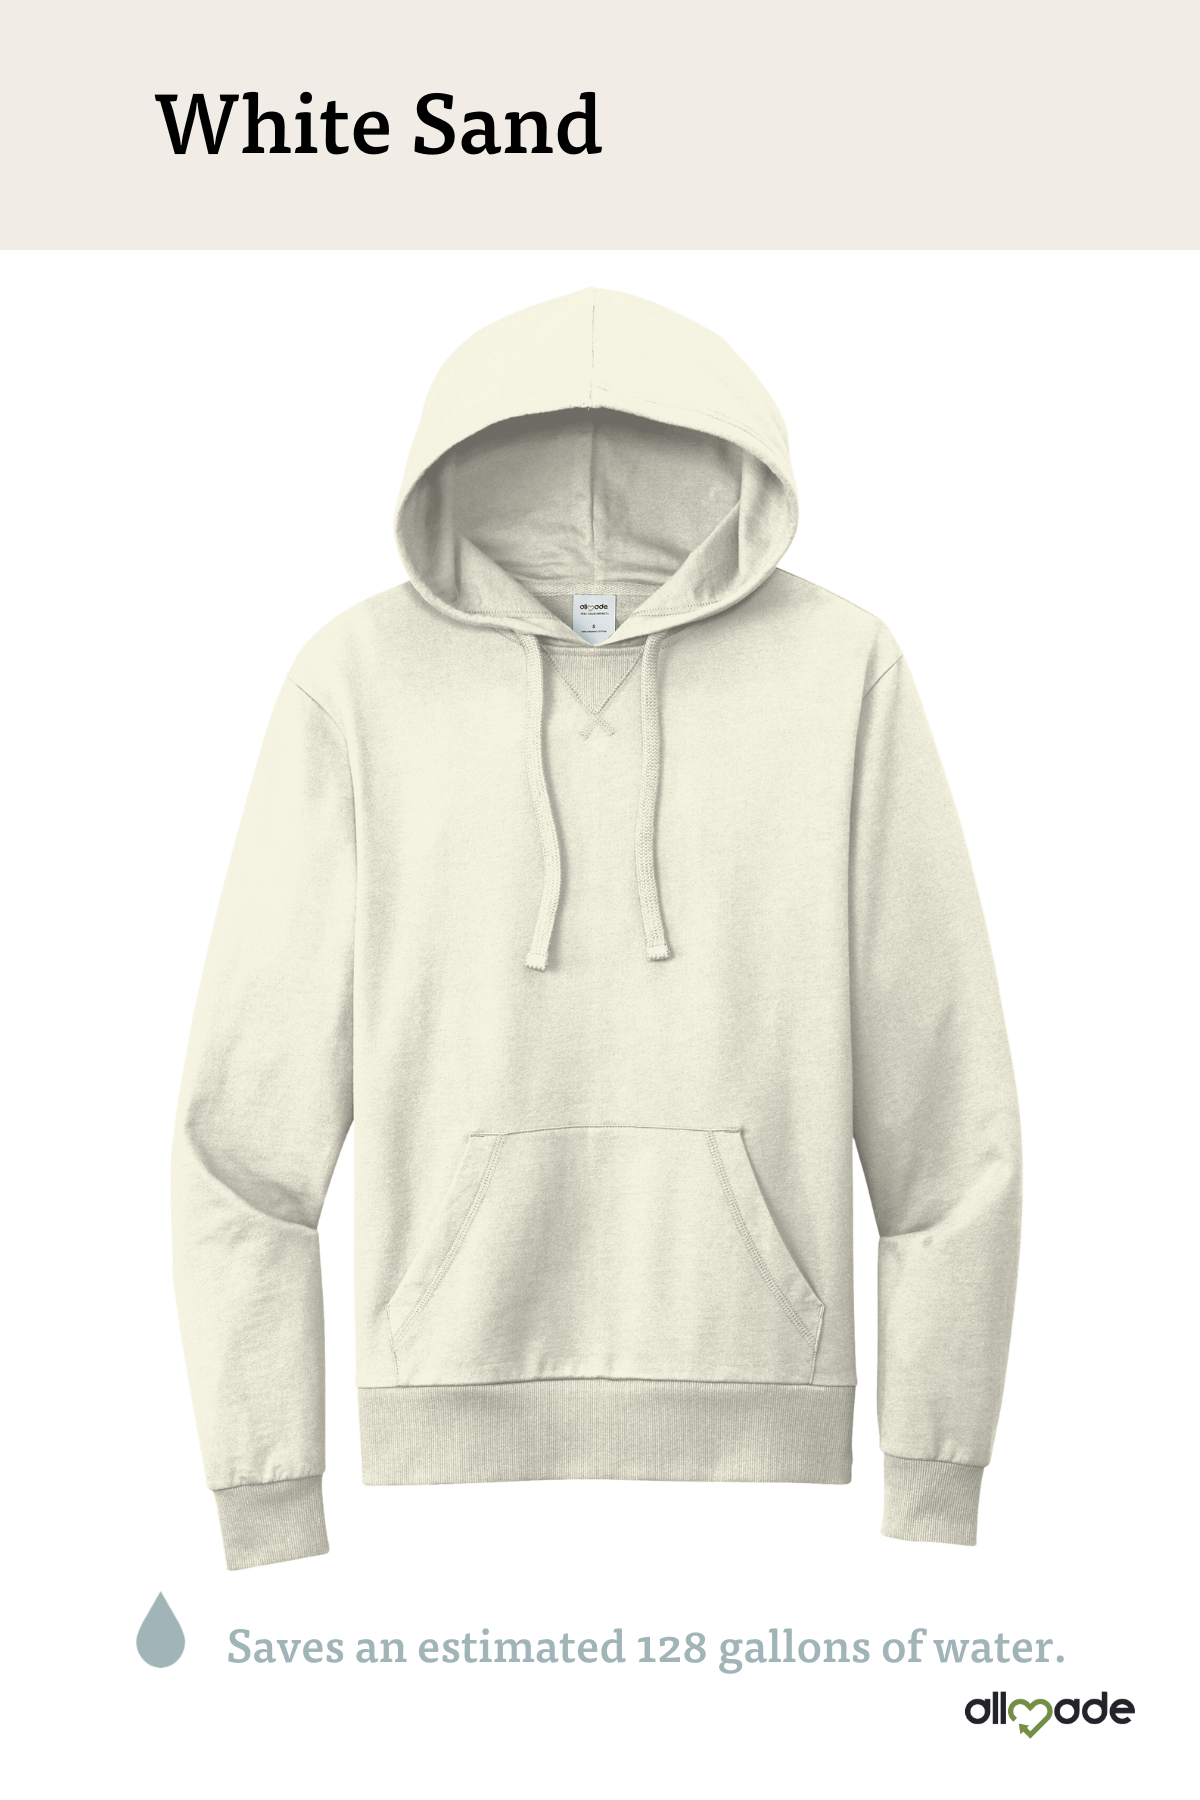 Here Comes The Sun Hoodie